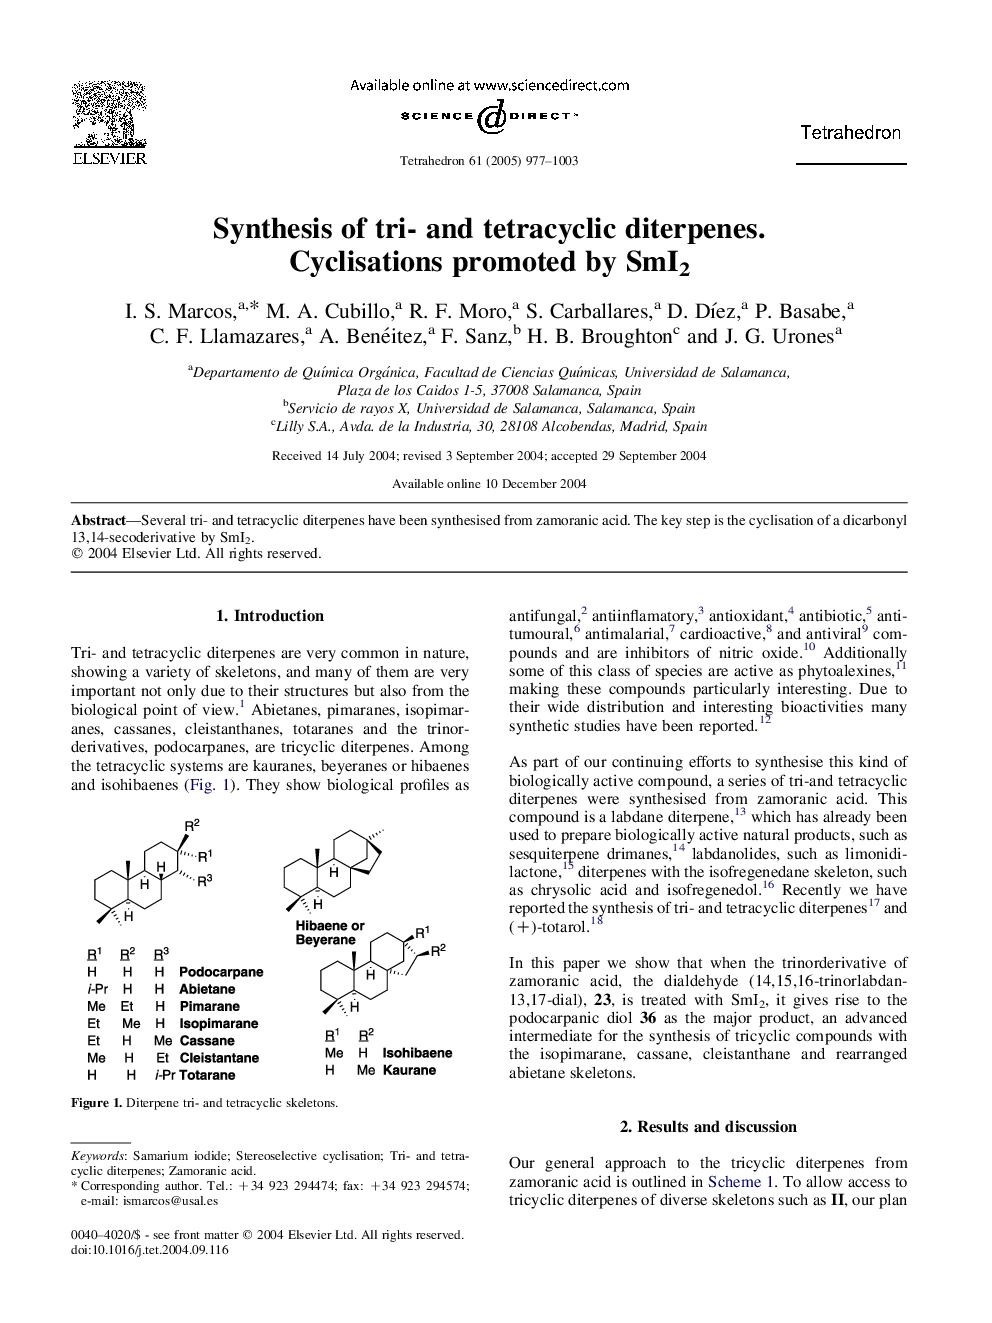 Synthesis of tri- and tetracyclic diterpenes. Cyclisations promoted by SmI2